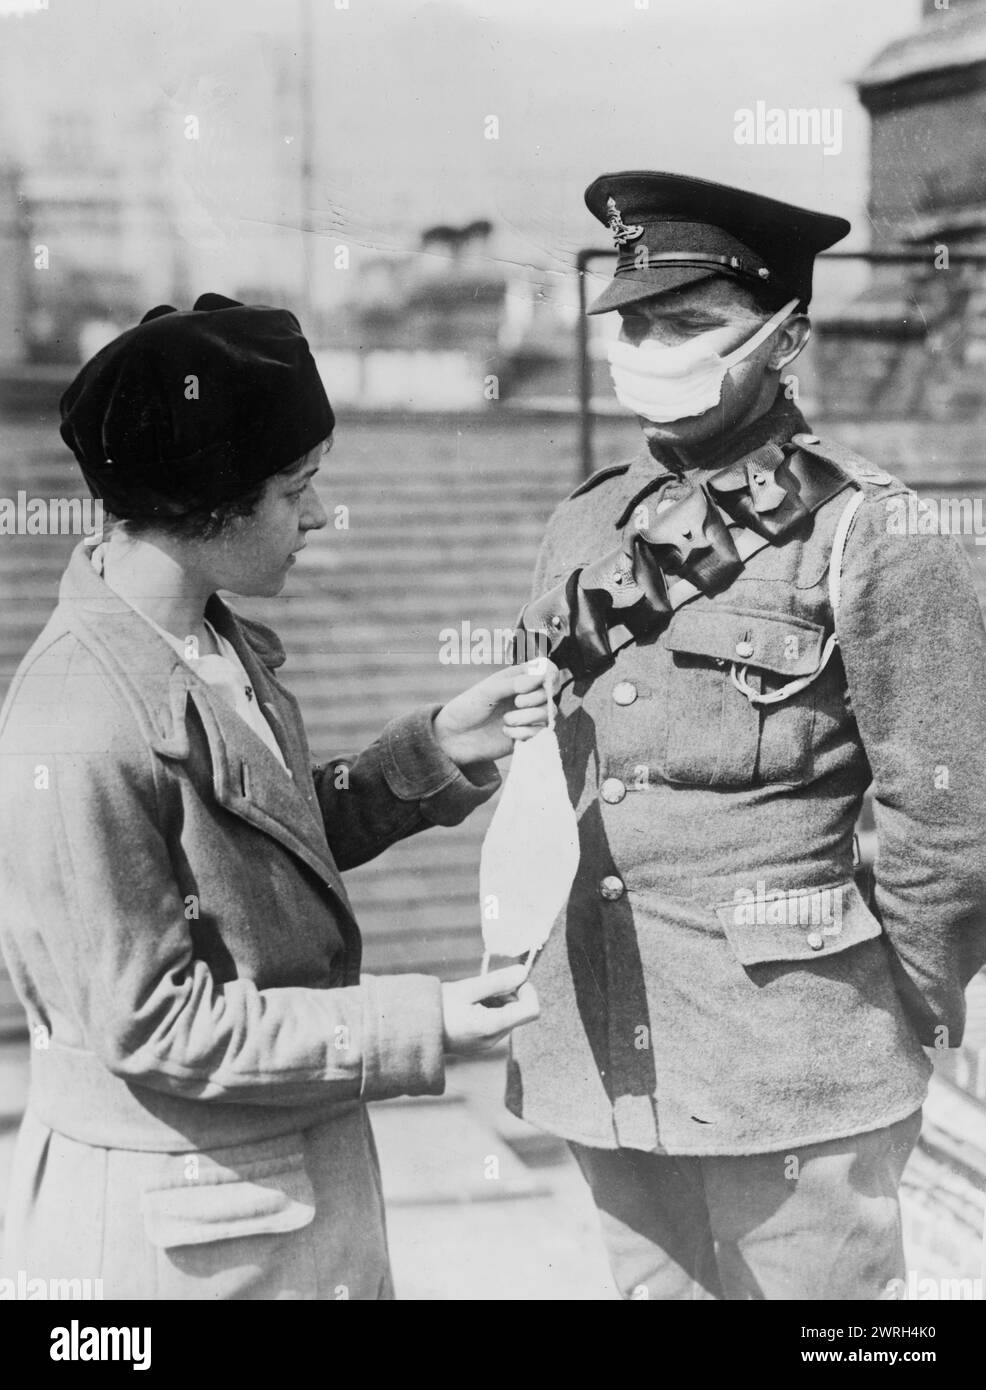 Respirator for British soldiers, between 1914 and c1915. A British soldier wearing a face mask to protect against poison gas, standing with a woman holding another face mask, during World War I. Stock Photo